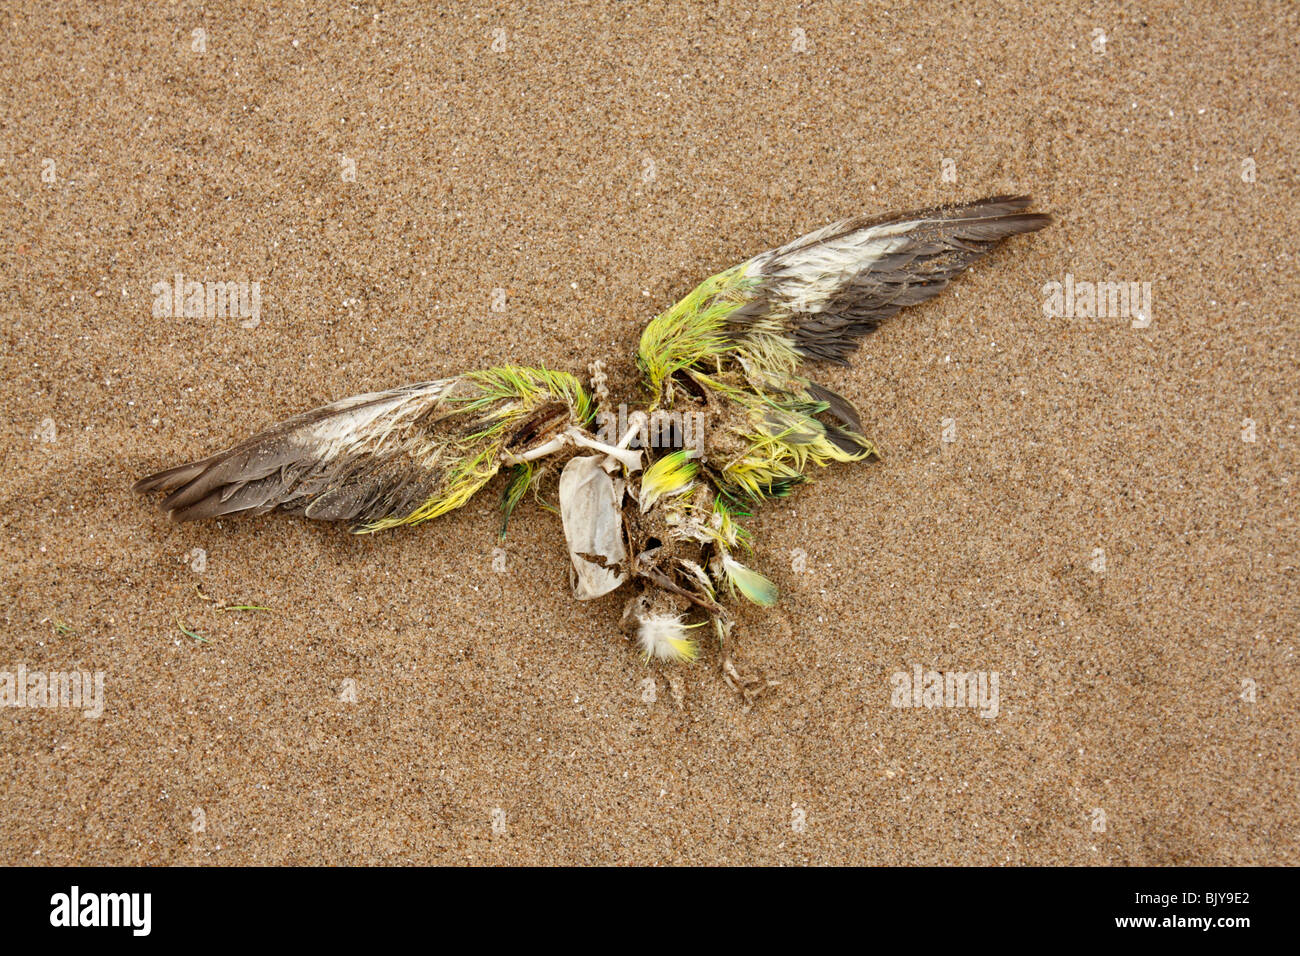 Dead Bird on a sandy beach with outspread wings Stock Photo